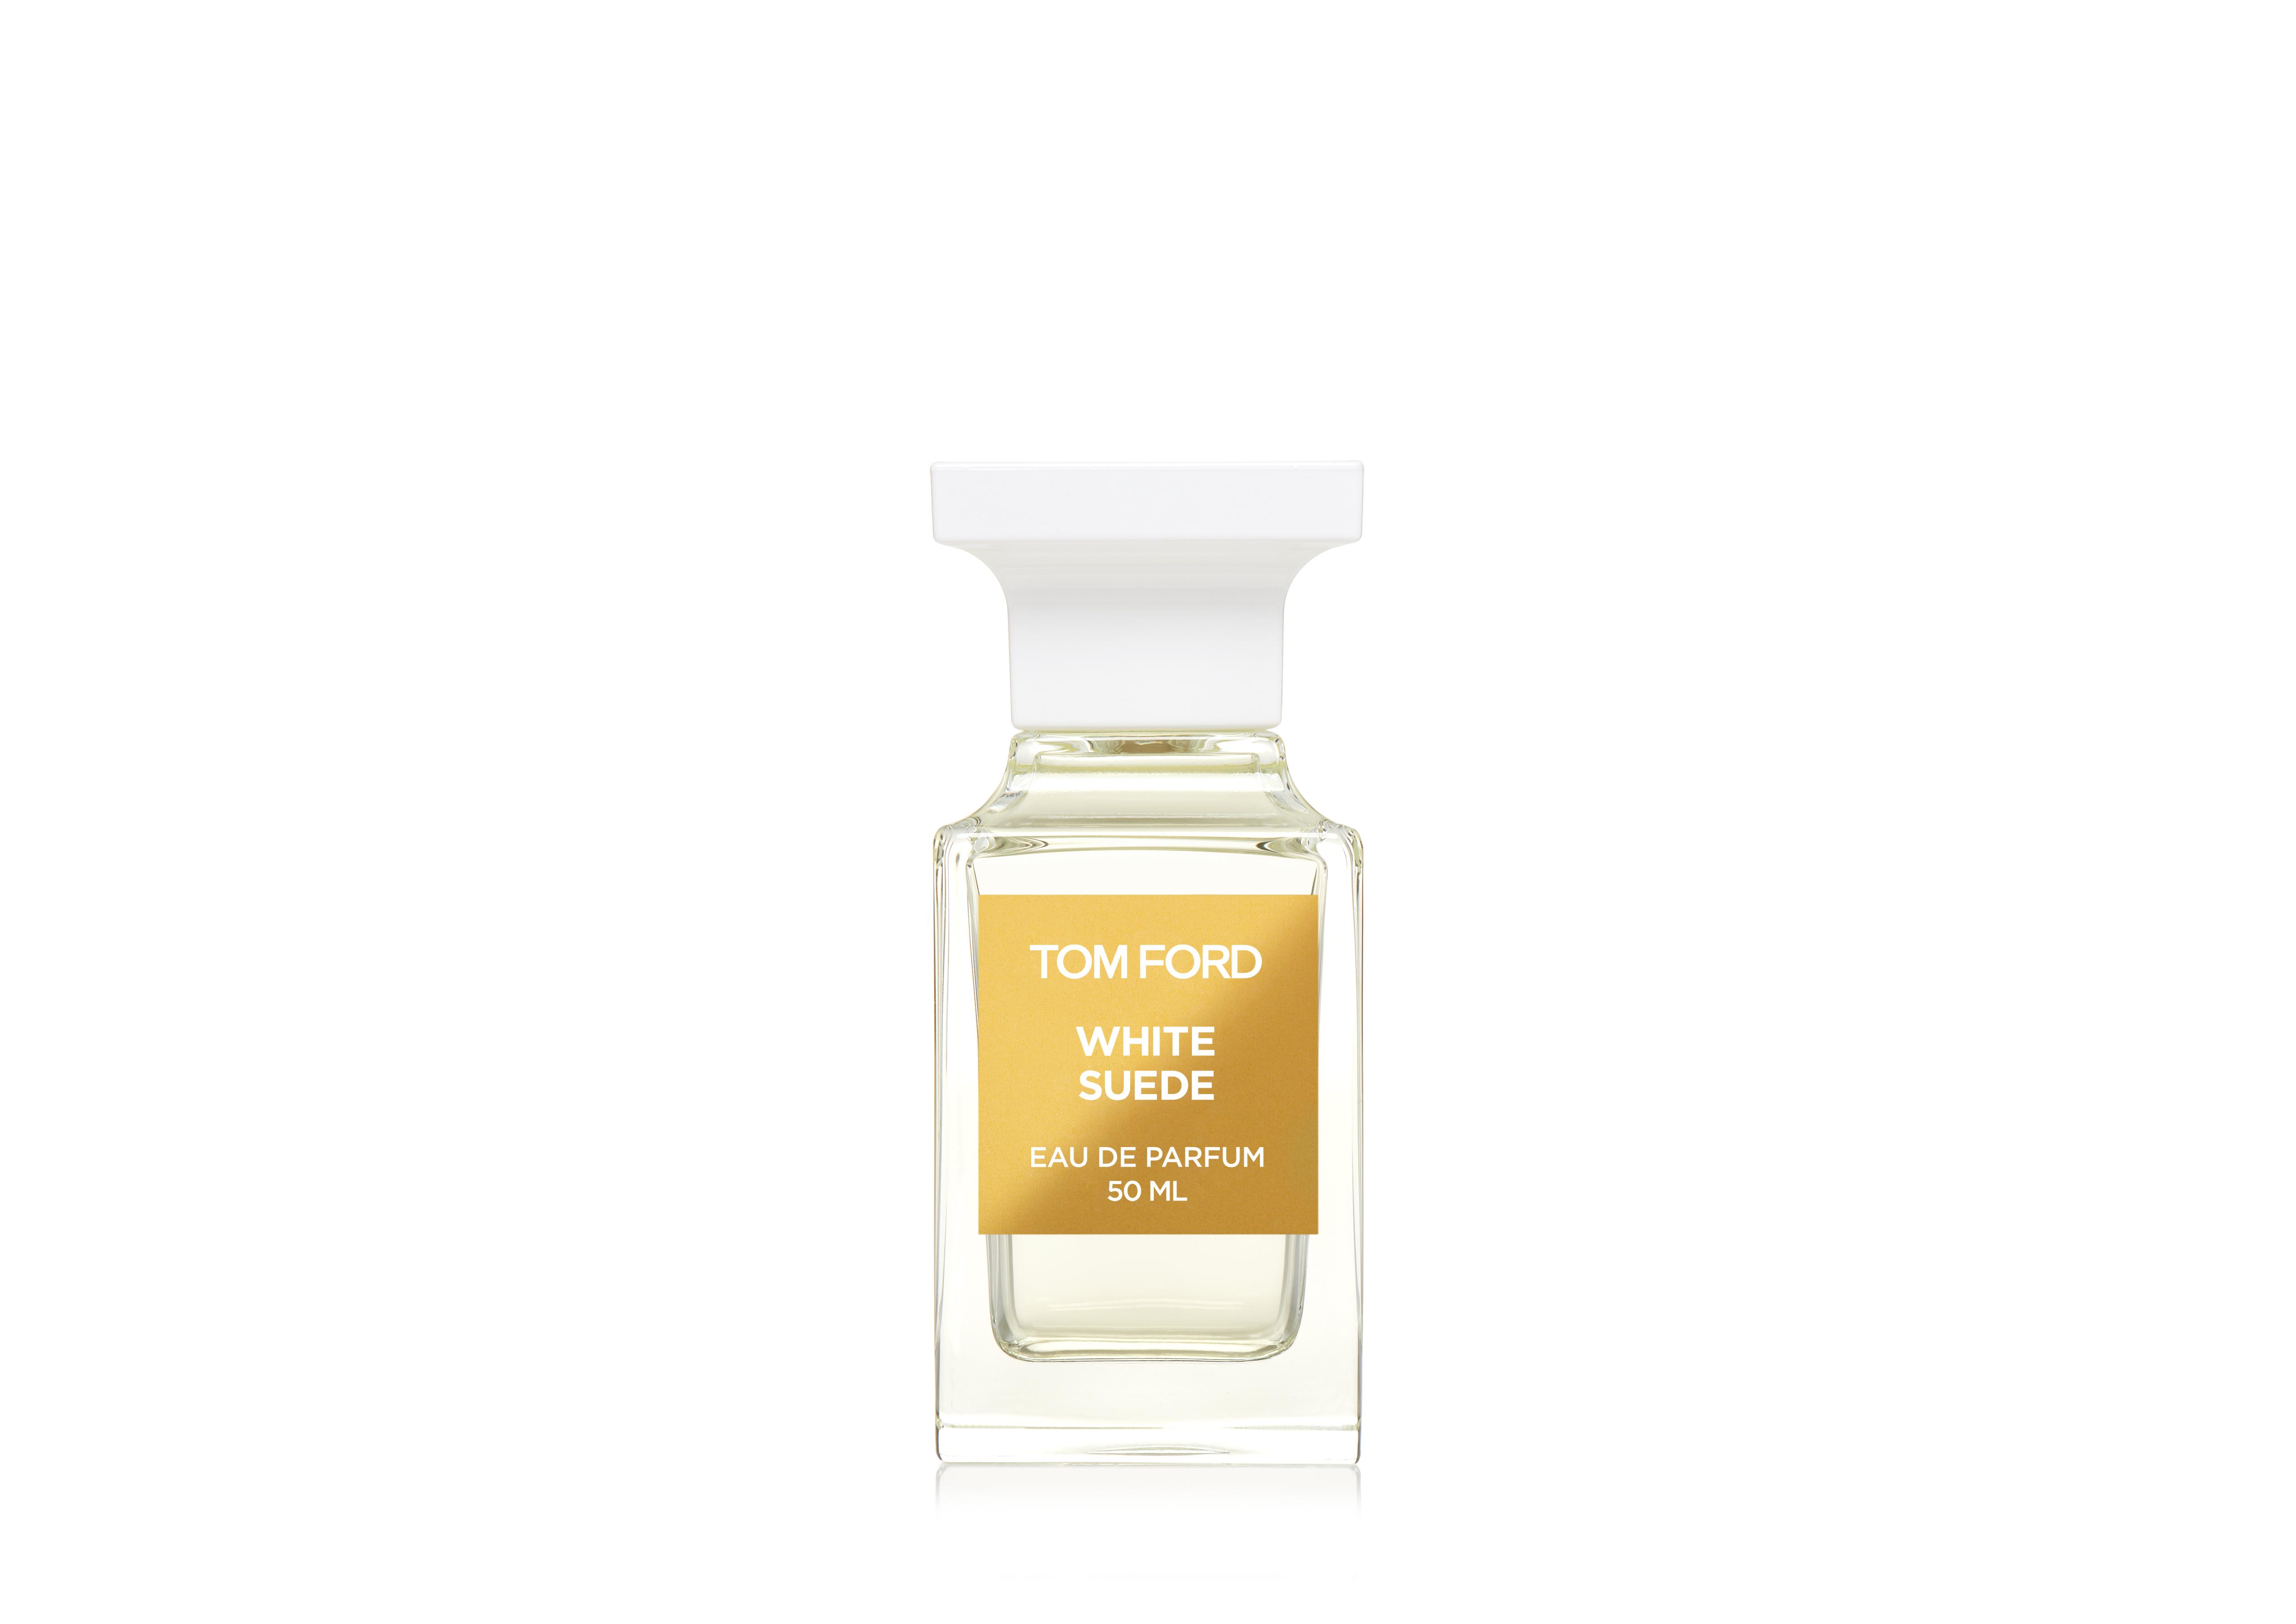 TOM FORD WHITE SUEDE 50ml